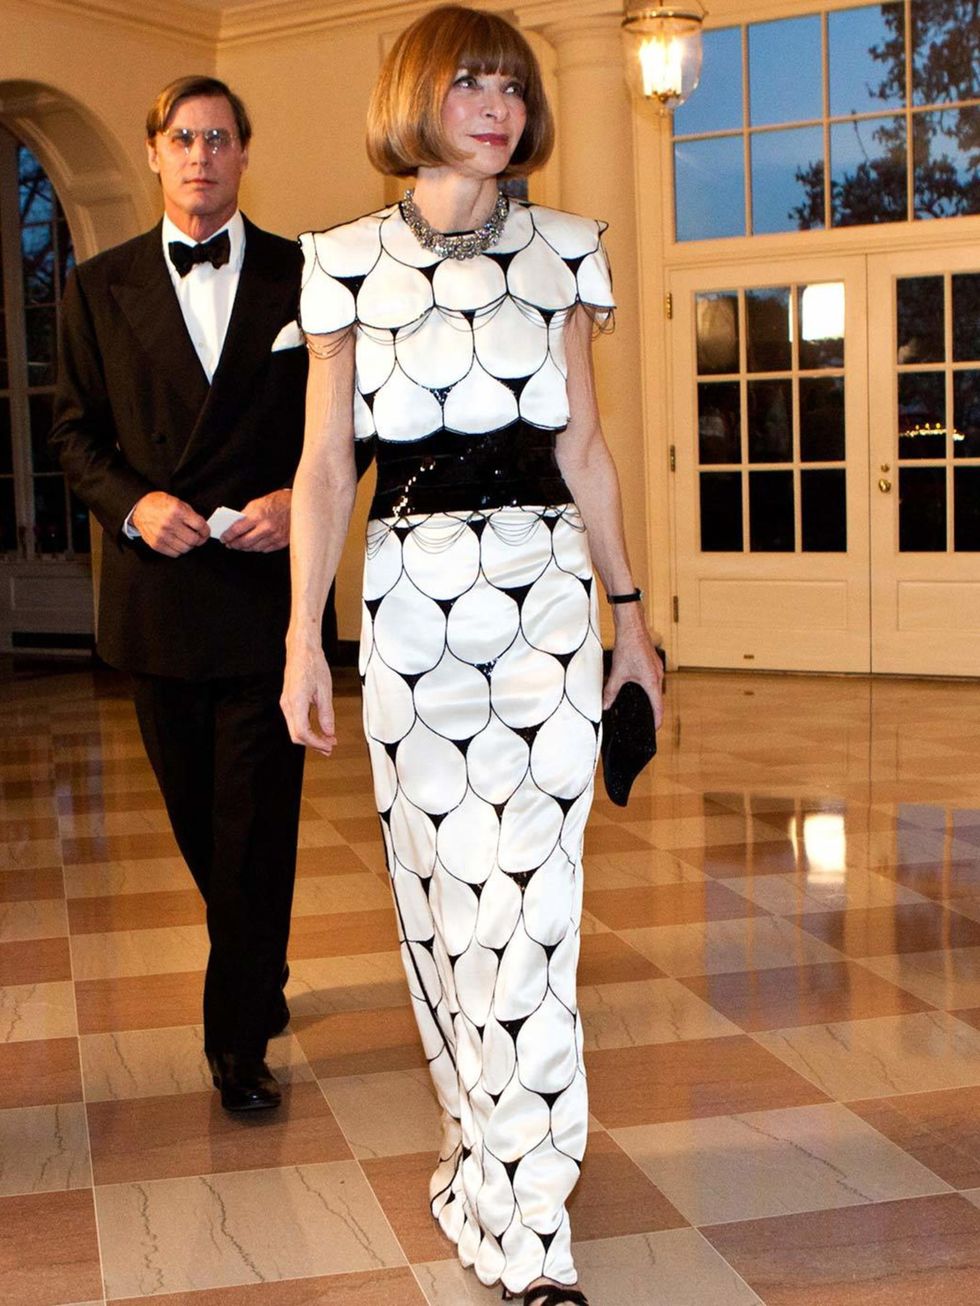 <p>Anna Wintour attends the State Dinner in honor of British Prime Minister David Cameron at the White House on March 14, 2012 in Washington, DC.</p>